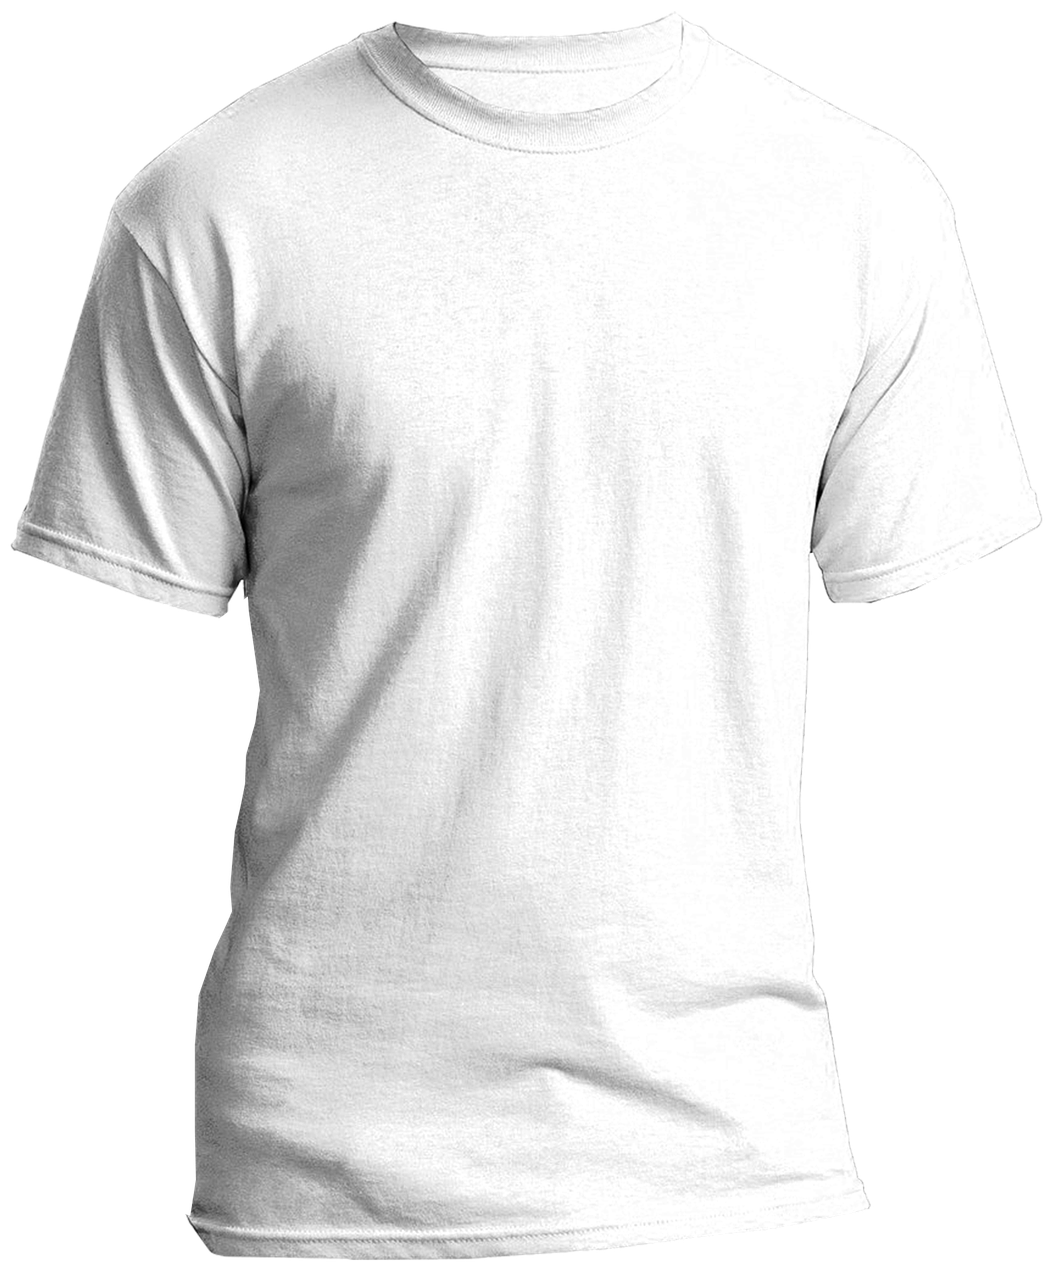 download-free-photo-of-blank-t-shirts-white-t-shirt-template-template-from-needpix